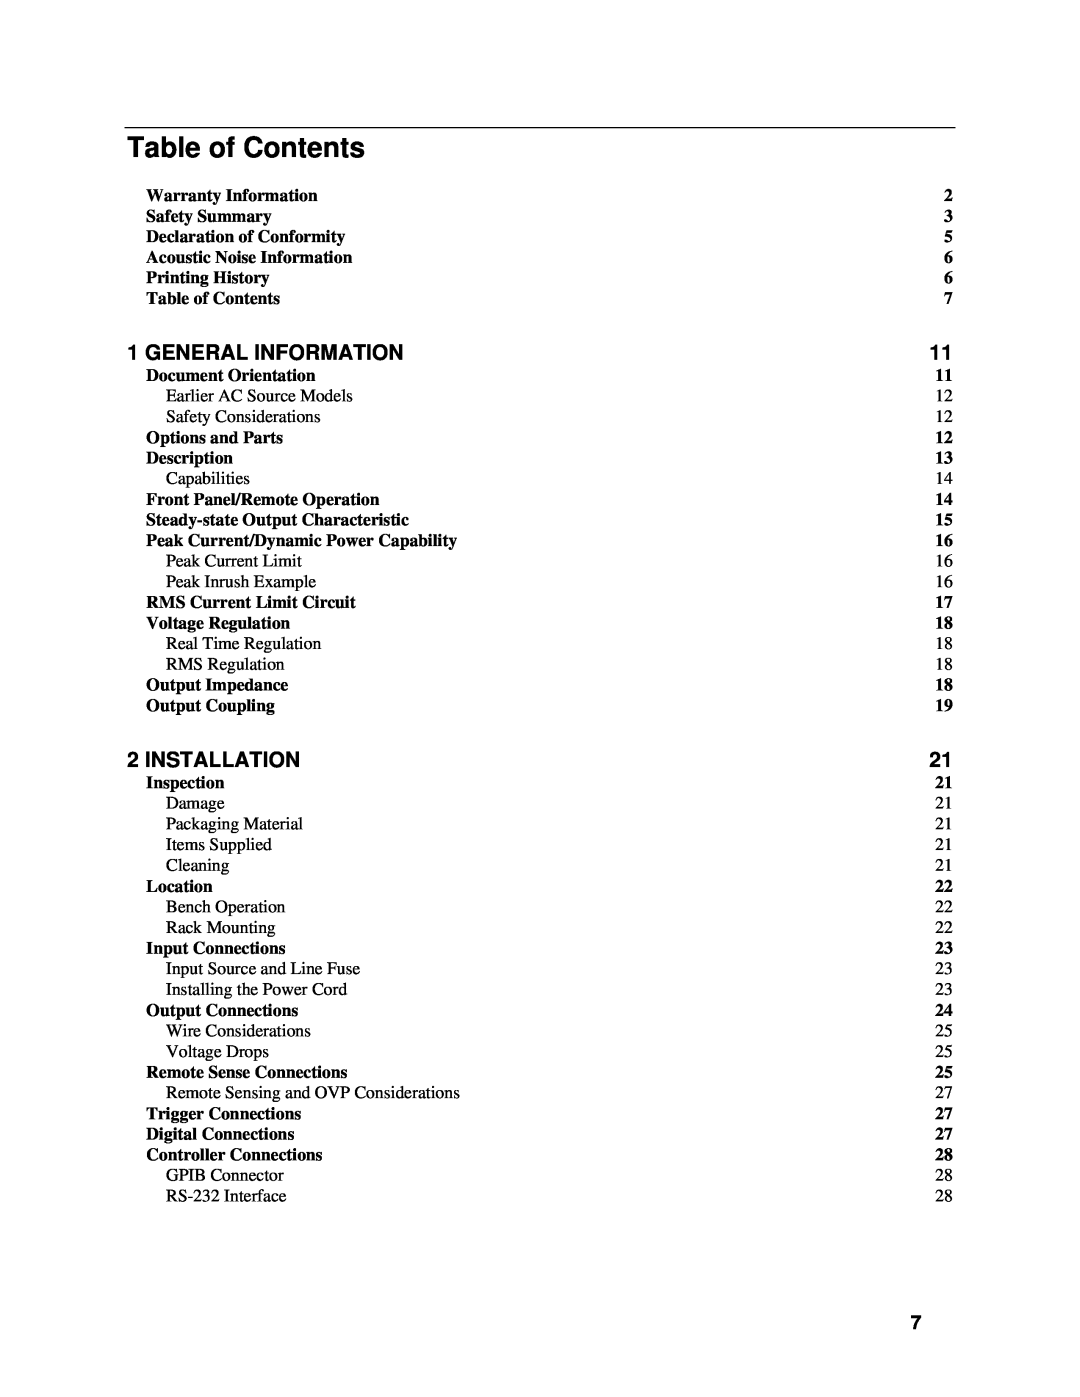 Agilent Technologies 6811B, 6813B, 6812B manual Table of Contents, General Information, Installation 